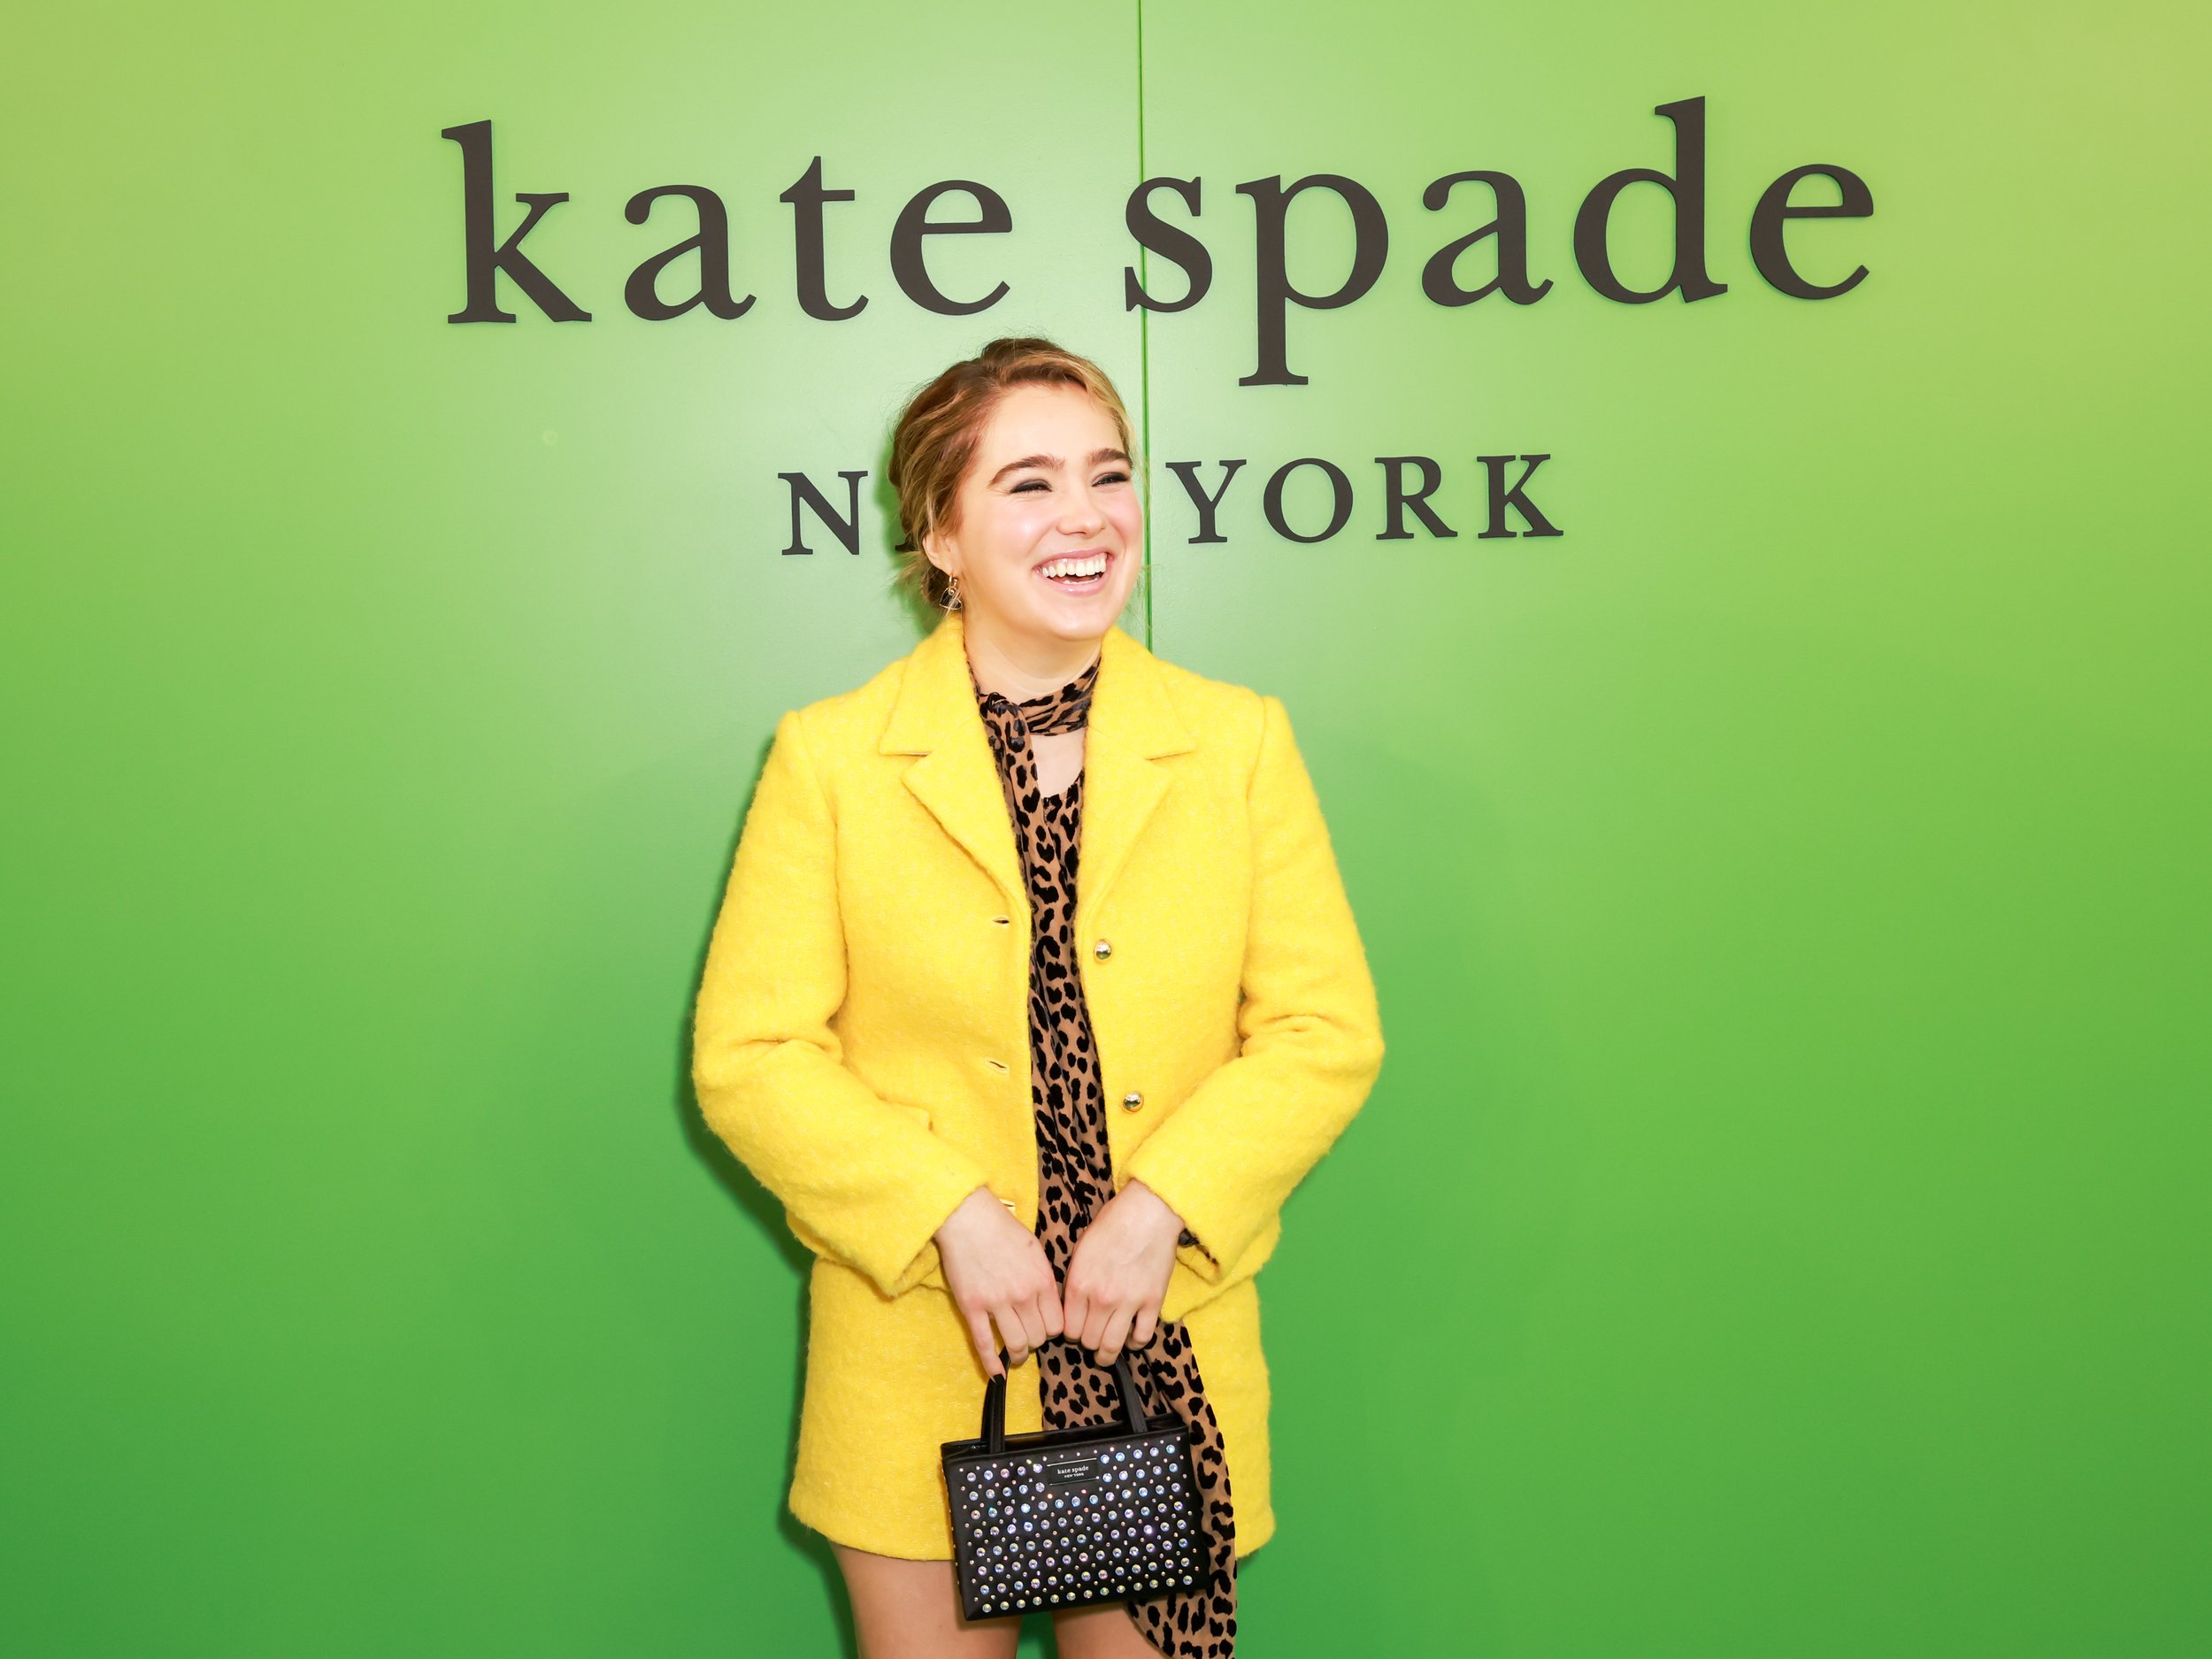 Kate Spade Sam Icon Crystal Embellished Crossbody Bag in Yellow